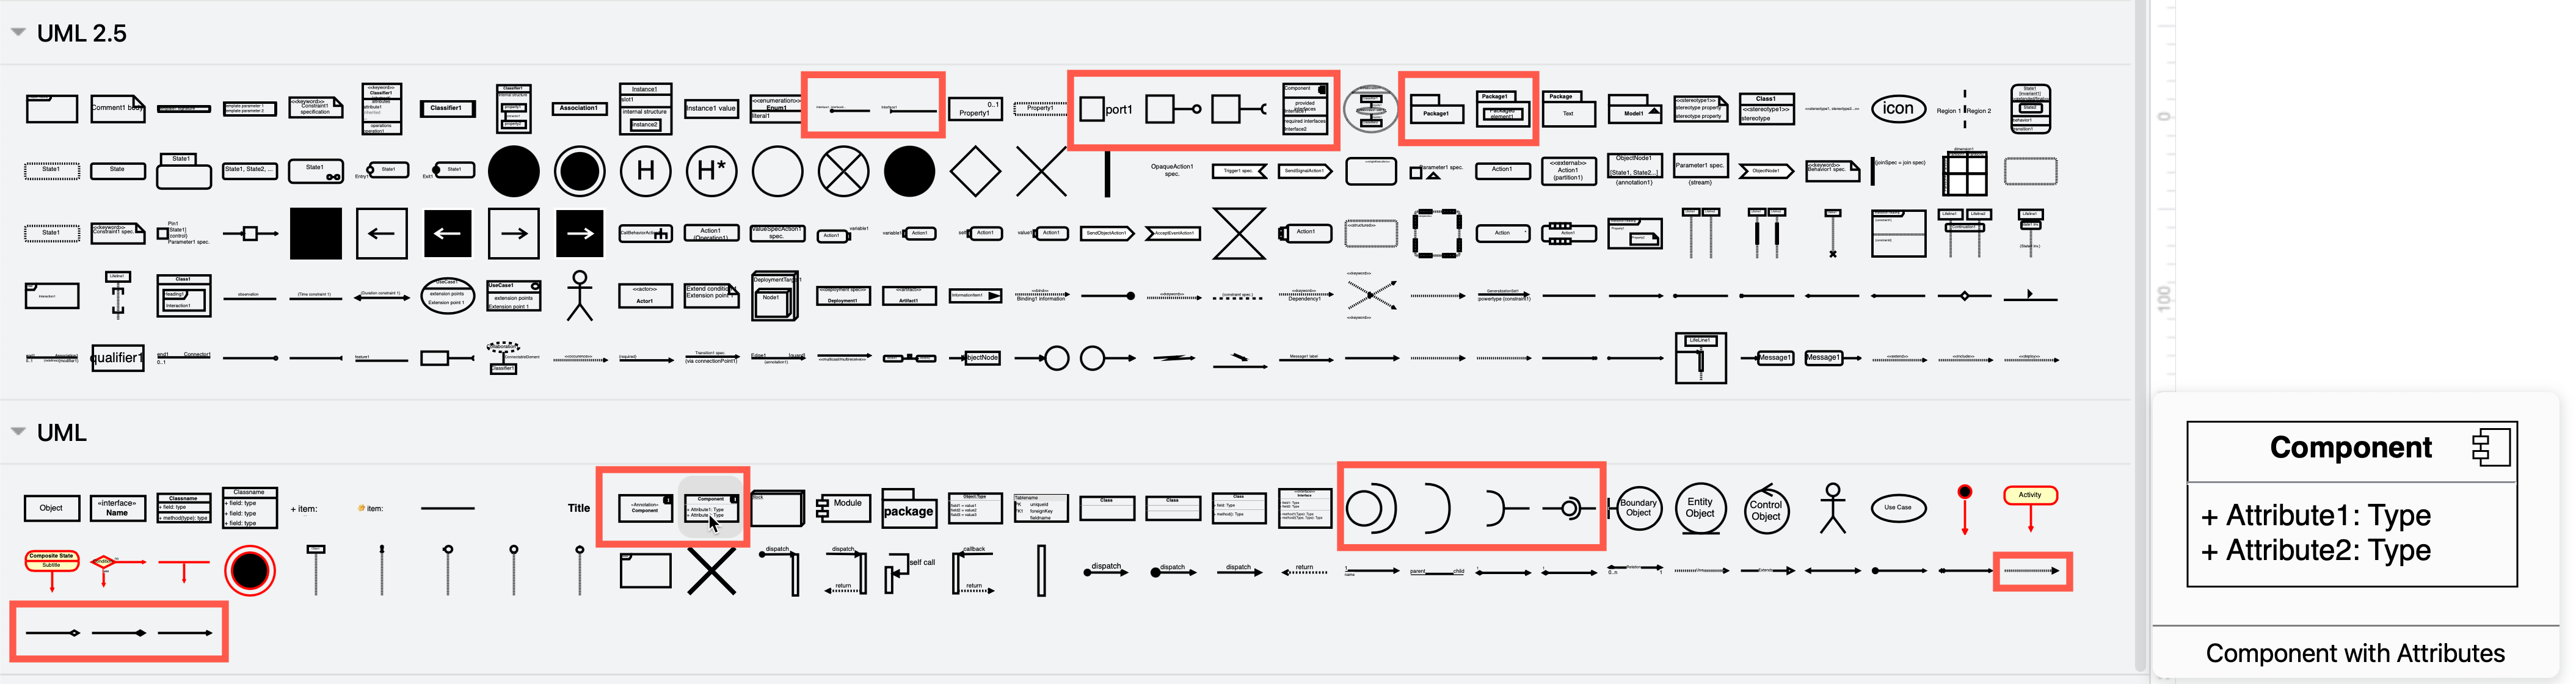 Component diagram shapes are spread out throughout the two shape libraries in draw.io - UML and UML 2.5